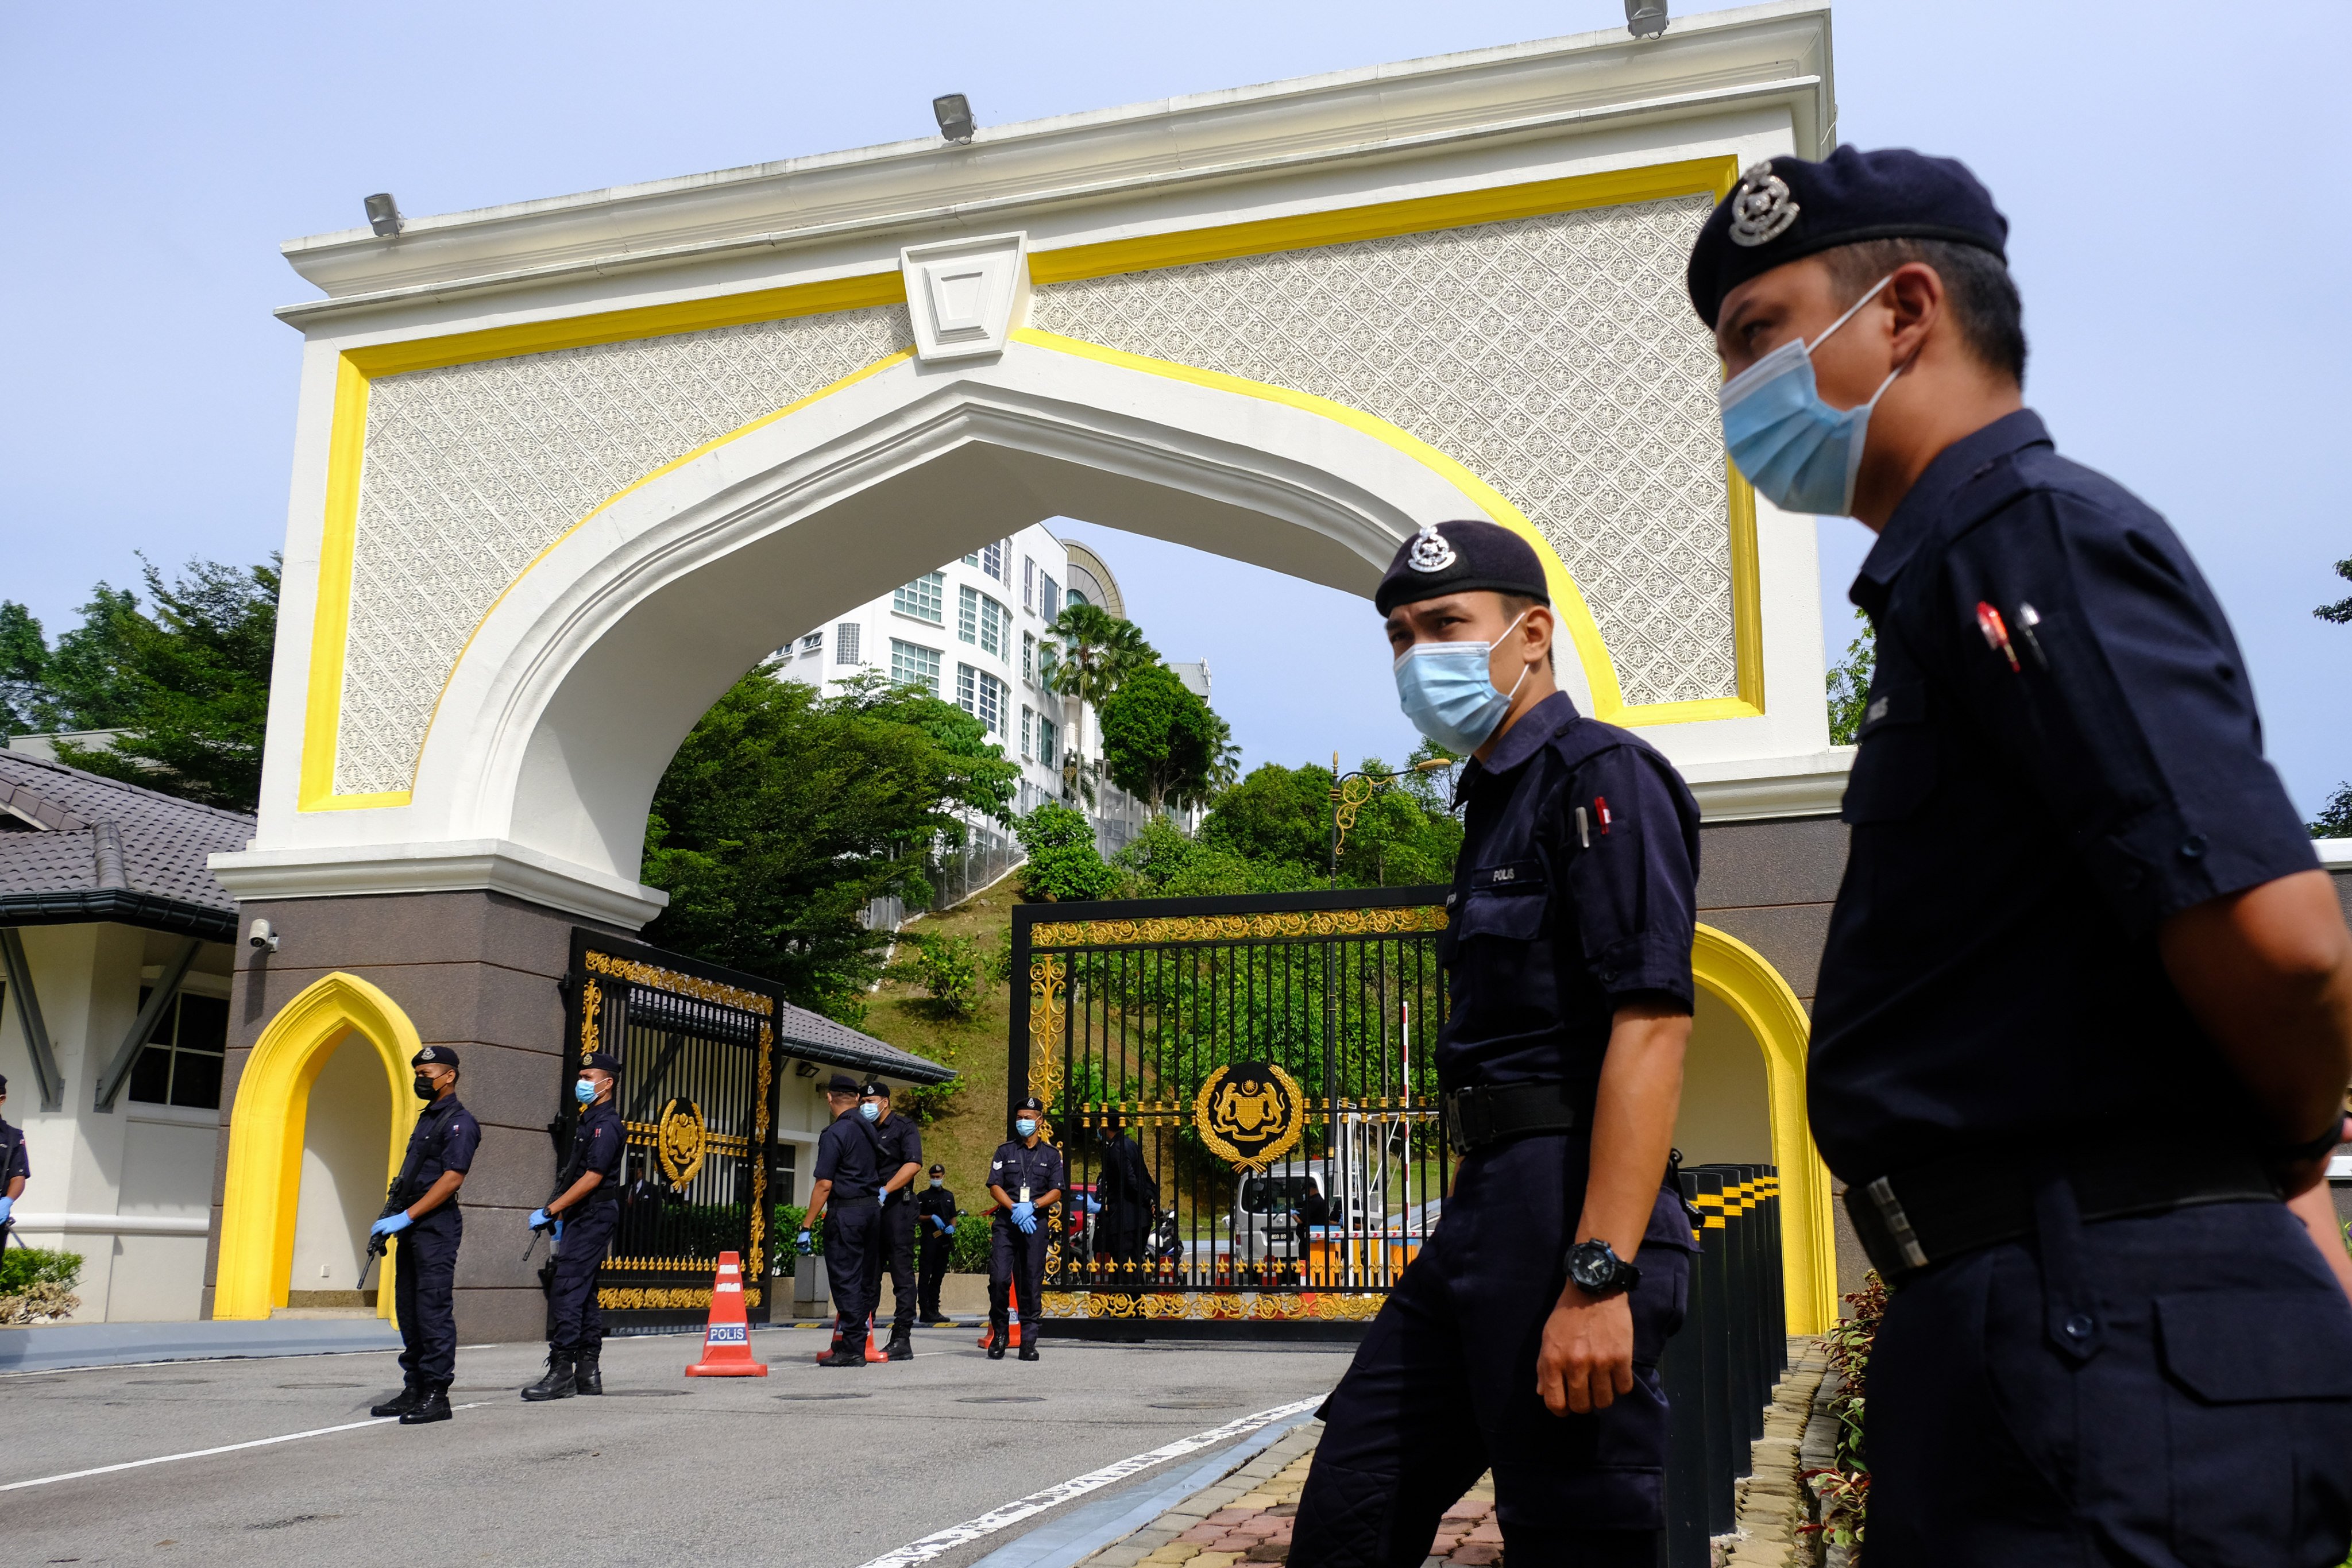 Police officers outside the main entrance of the Istana Negara palace in Kuala Lumpur on October 13, 2020. Photo: Bloomberg